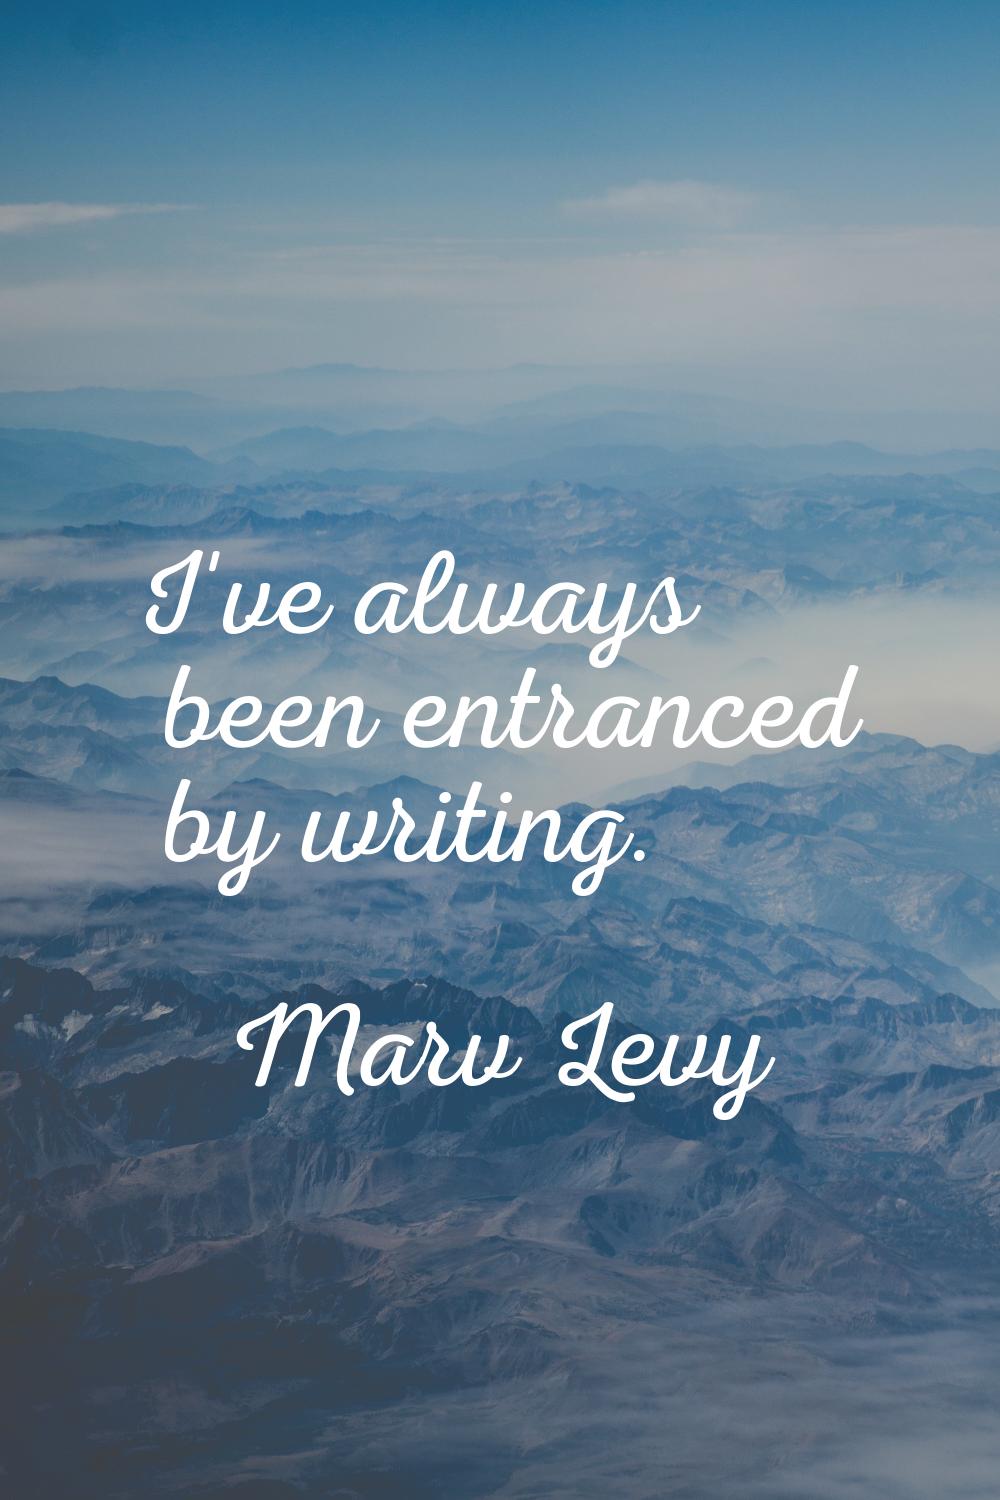 I've always been entranced by writing.